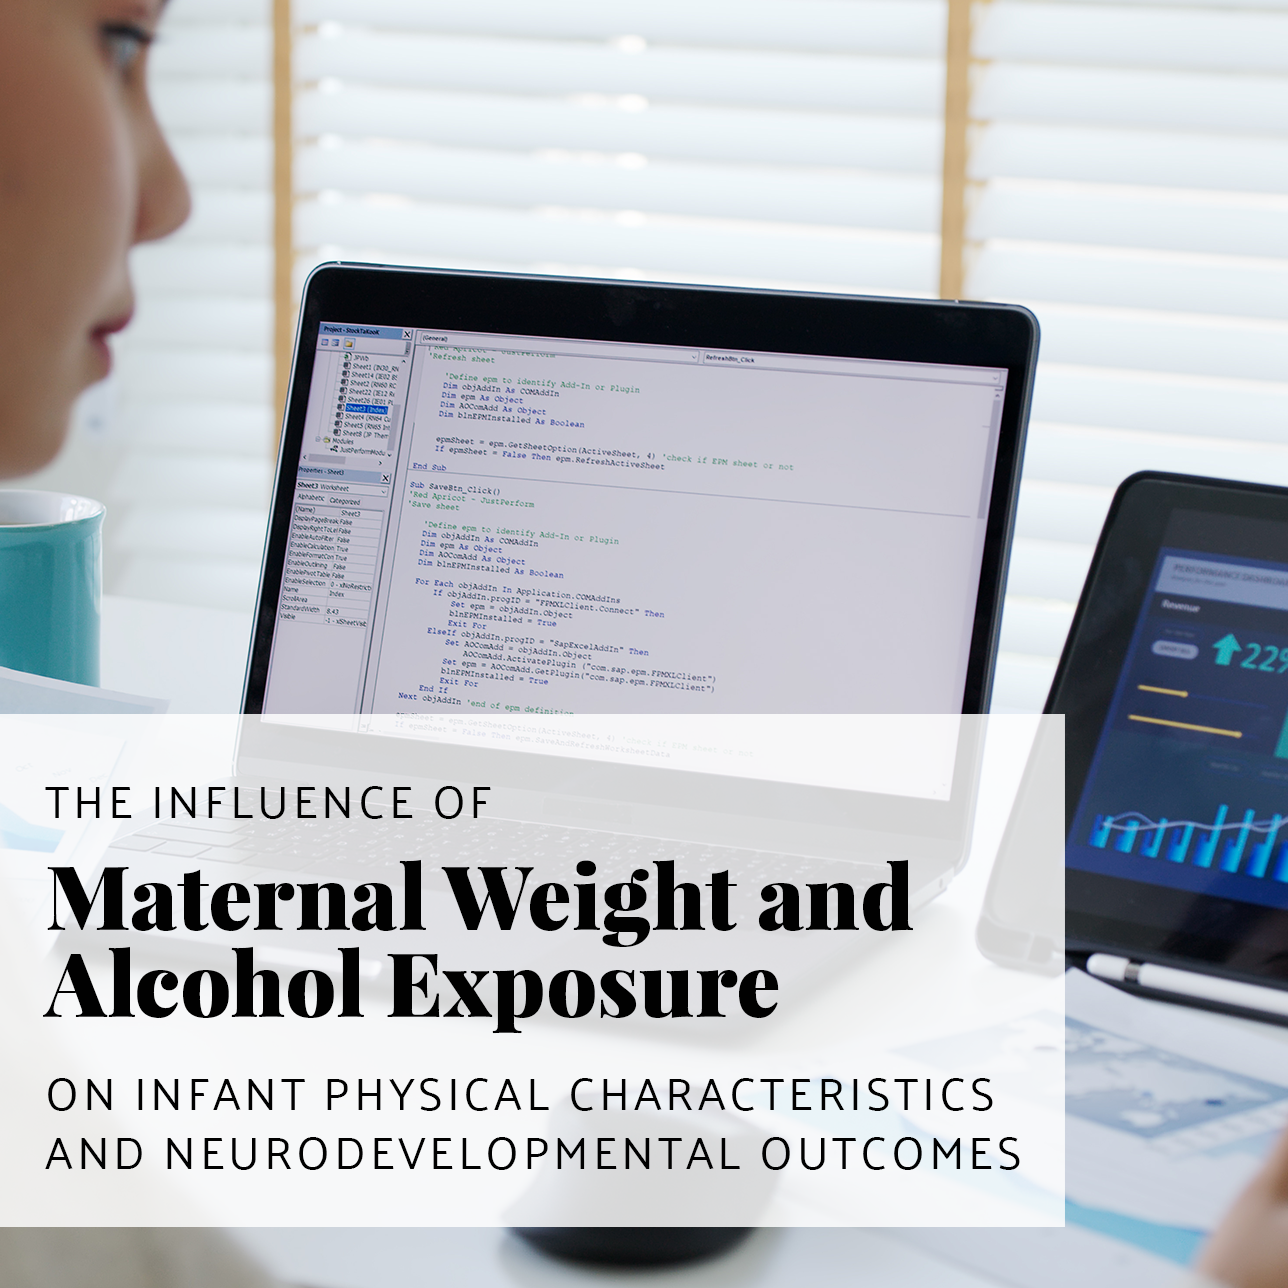 The influence of maternal weight and alcohol exposure on infant physical characteristics and neurodevelopmental outcomes